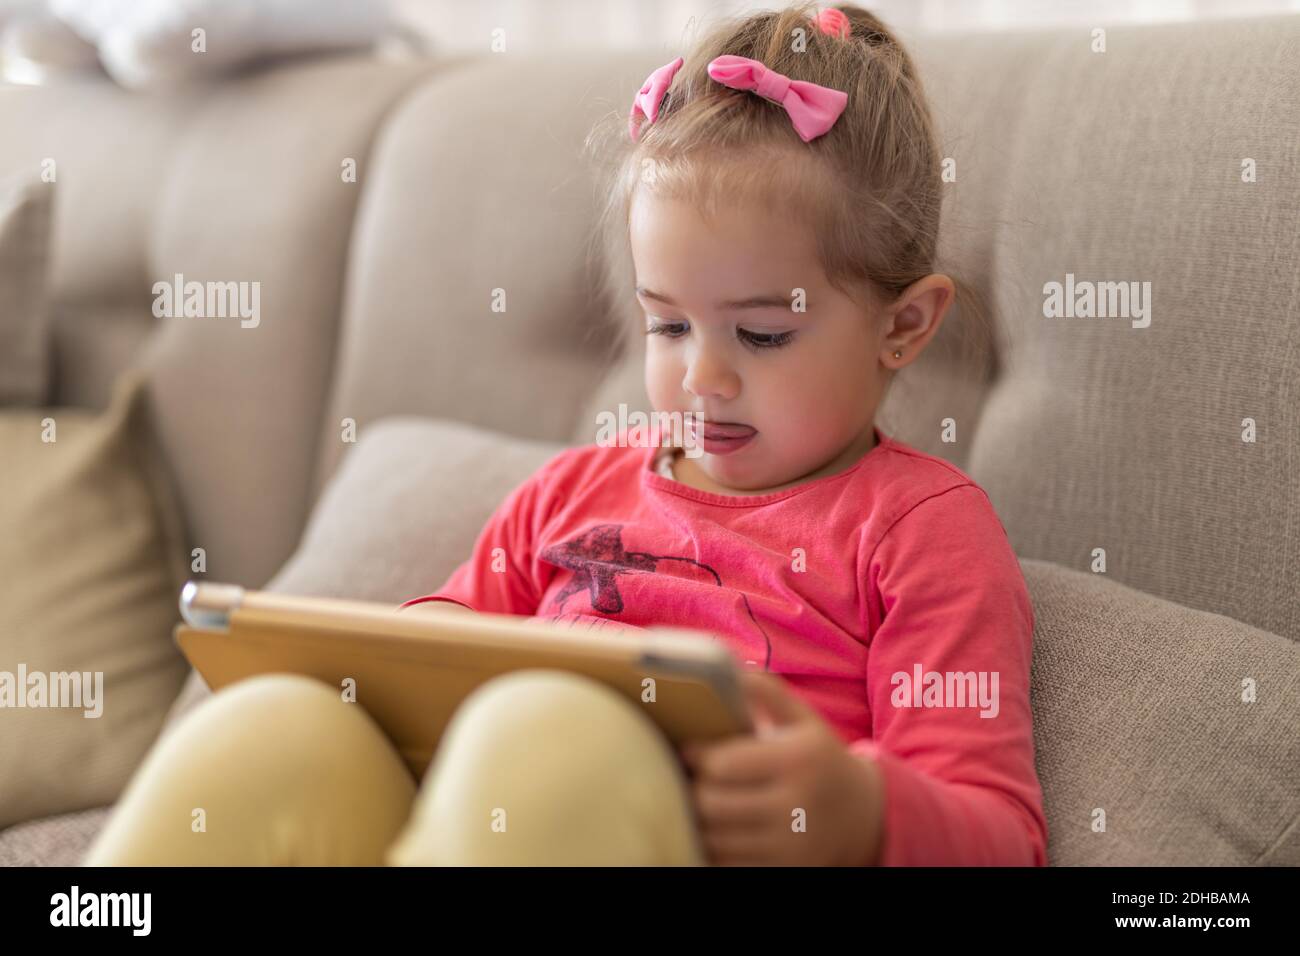 Young cute girl sitting at home using a child's tablet touch screen computer during home schooling due to closure of schools and pre-schools. Toddler Stock Photo